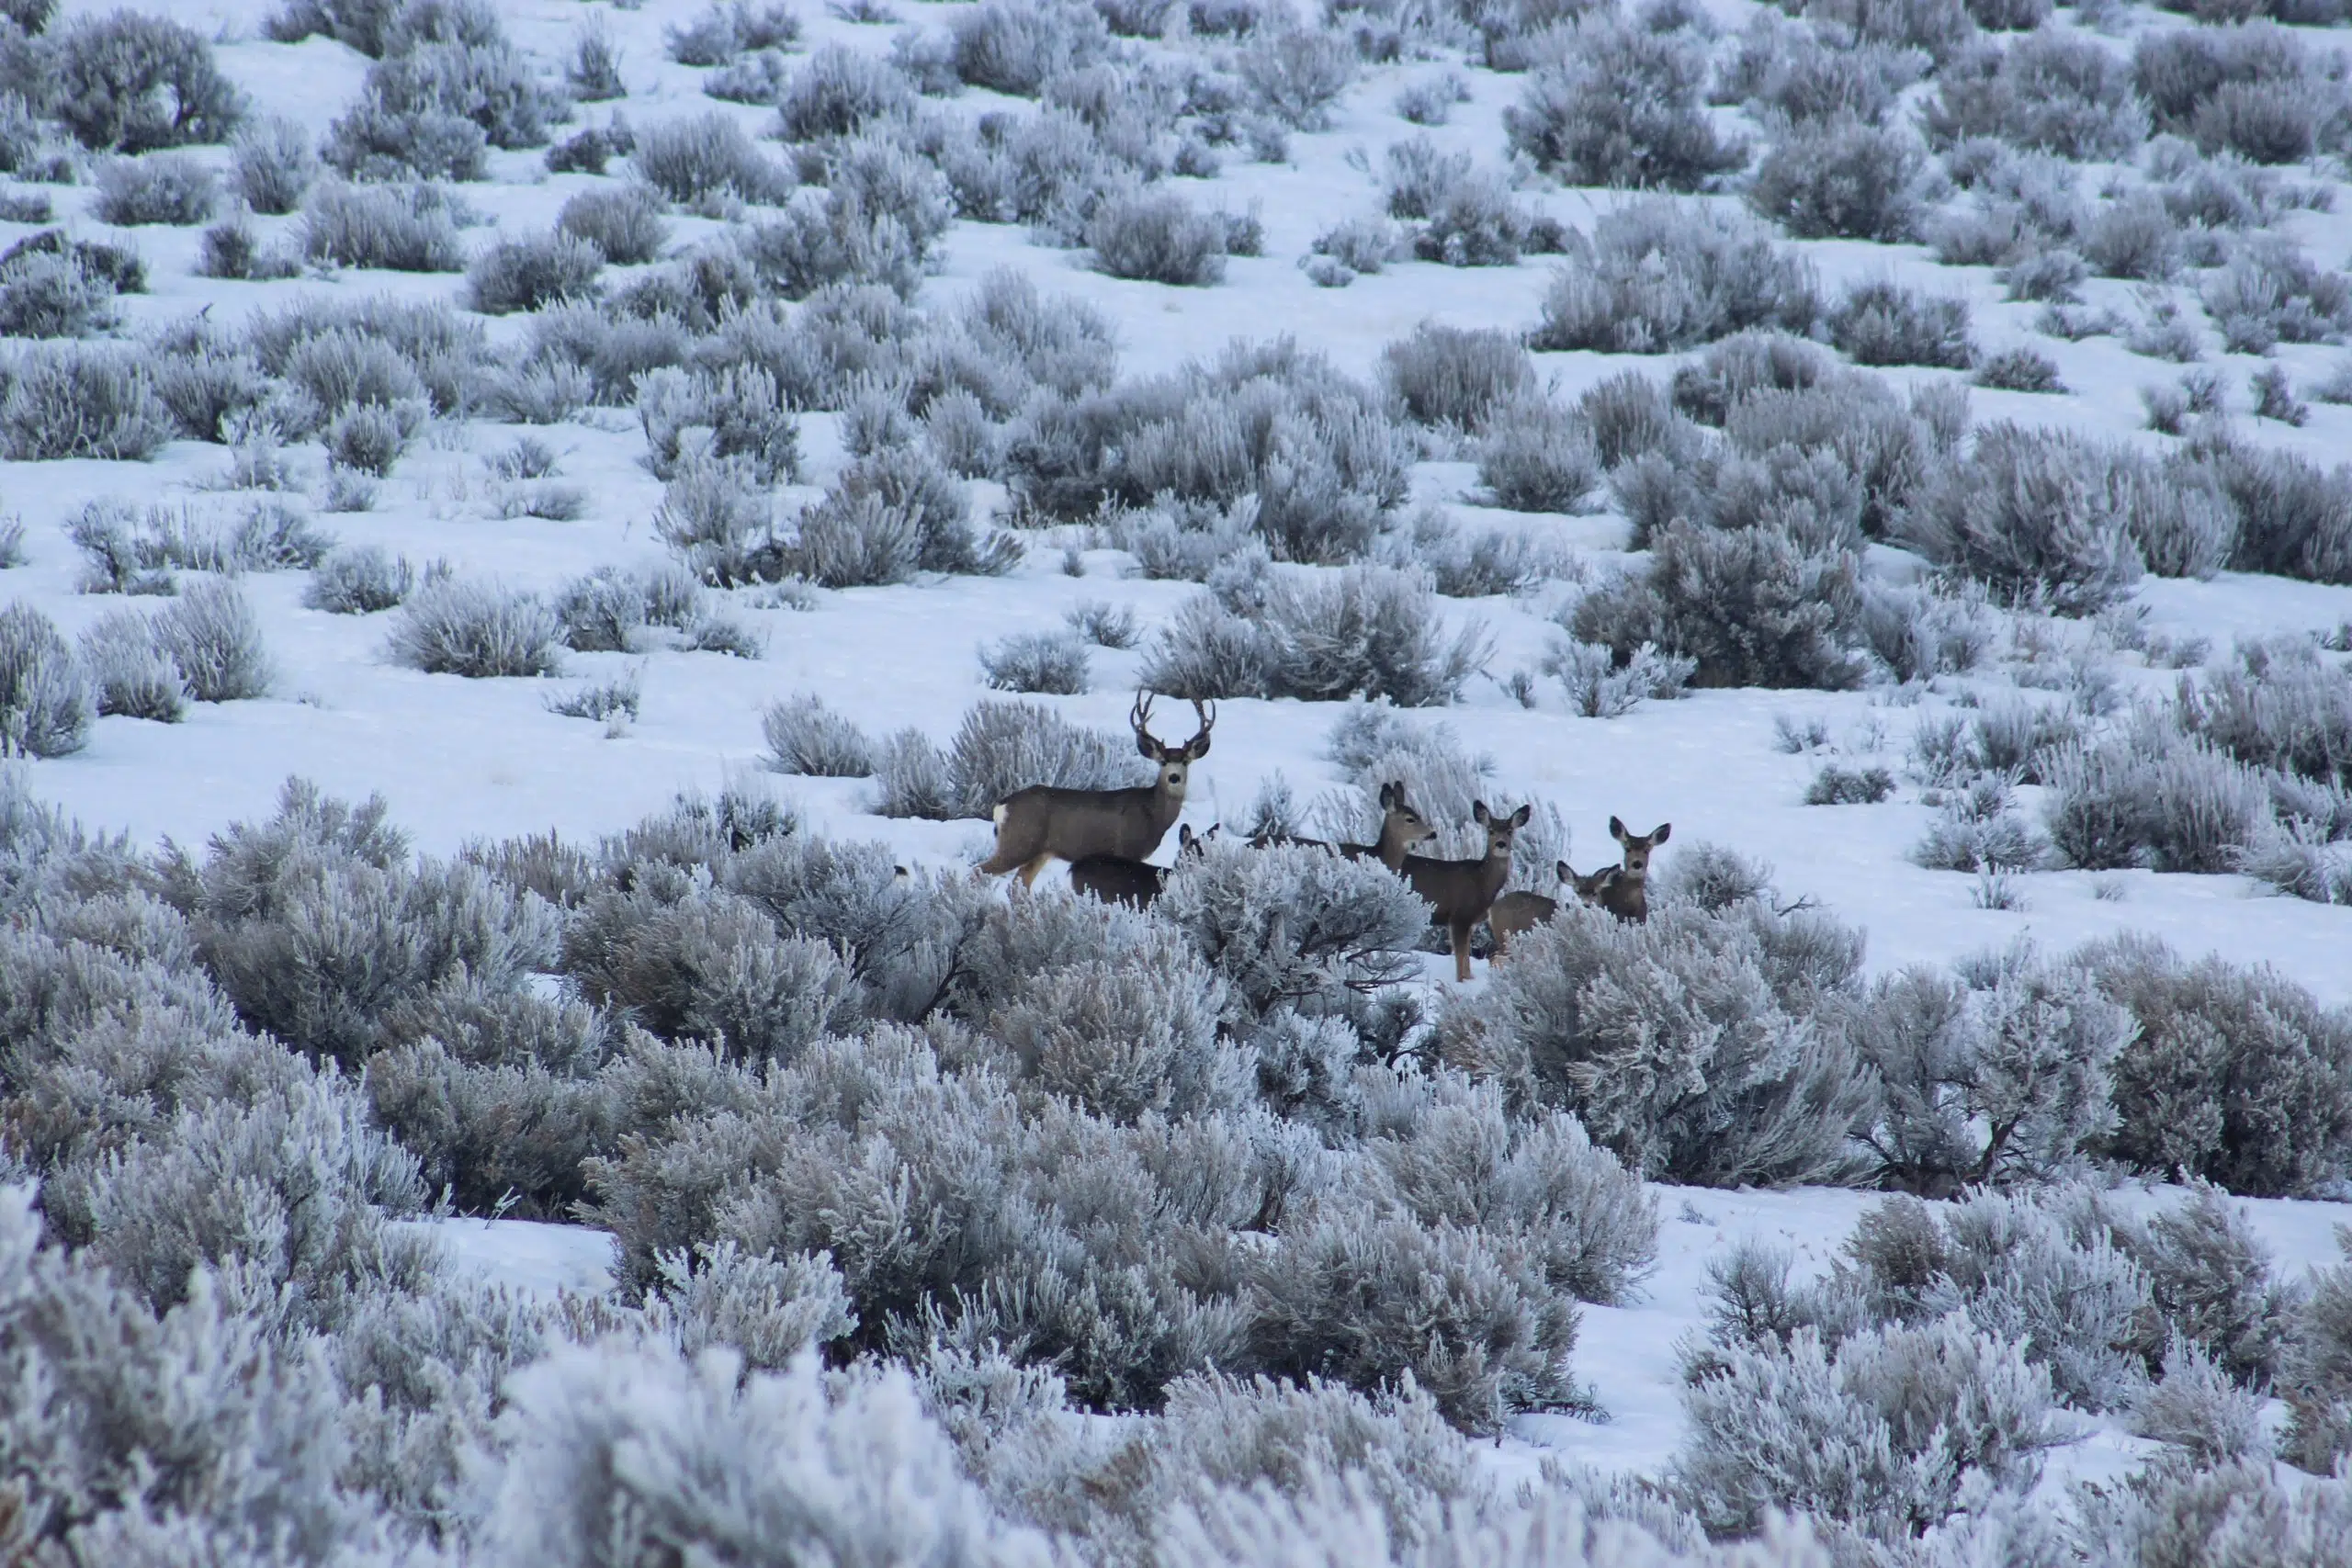 CWD detected for first time in Valley, Keya Paha counties